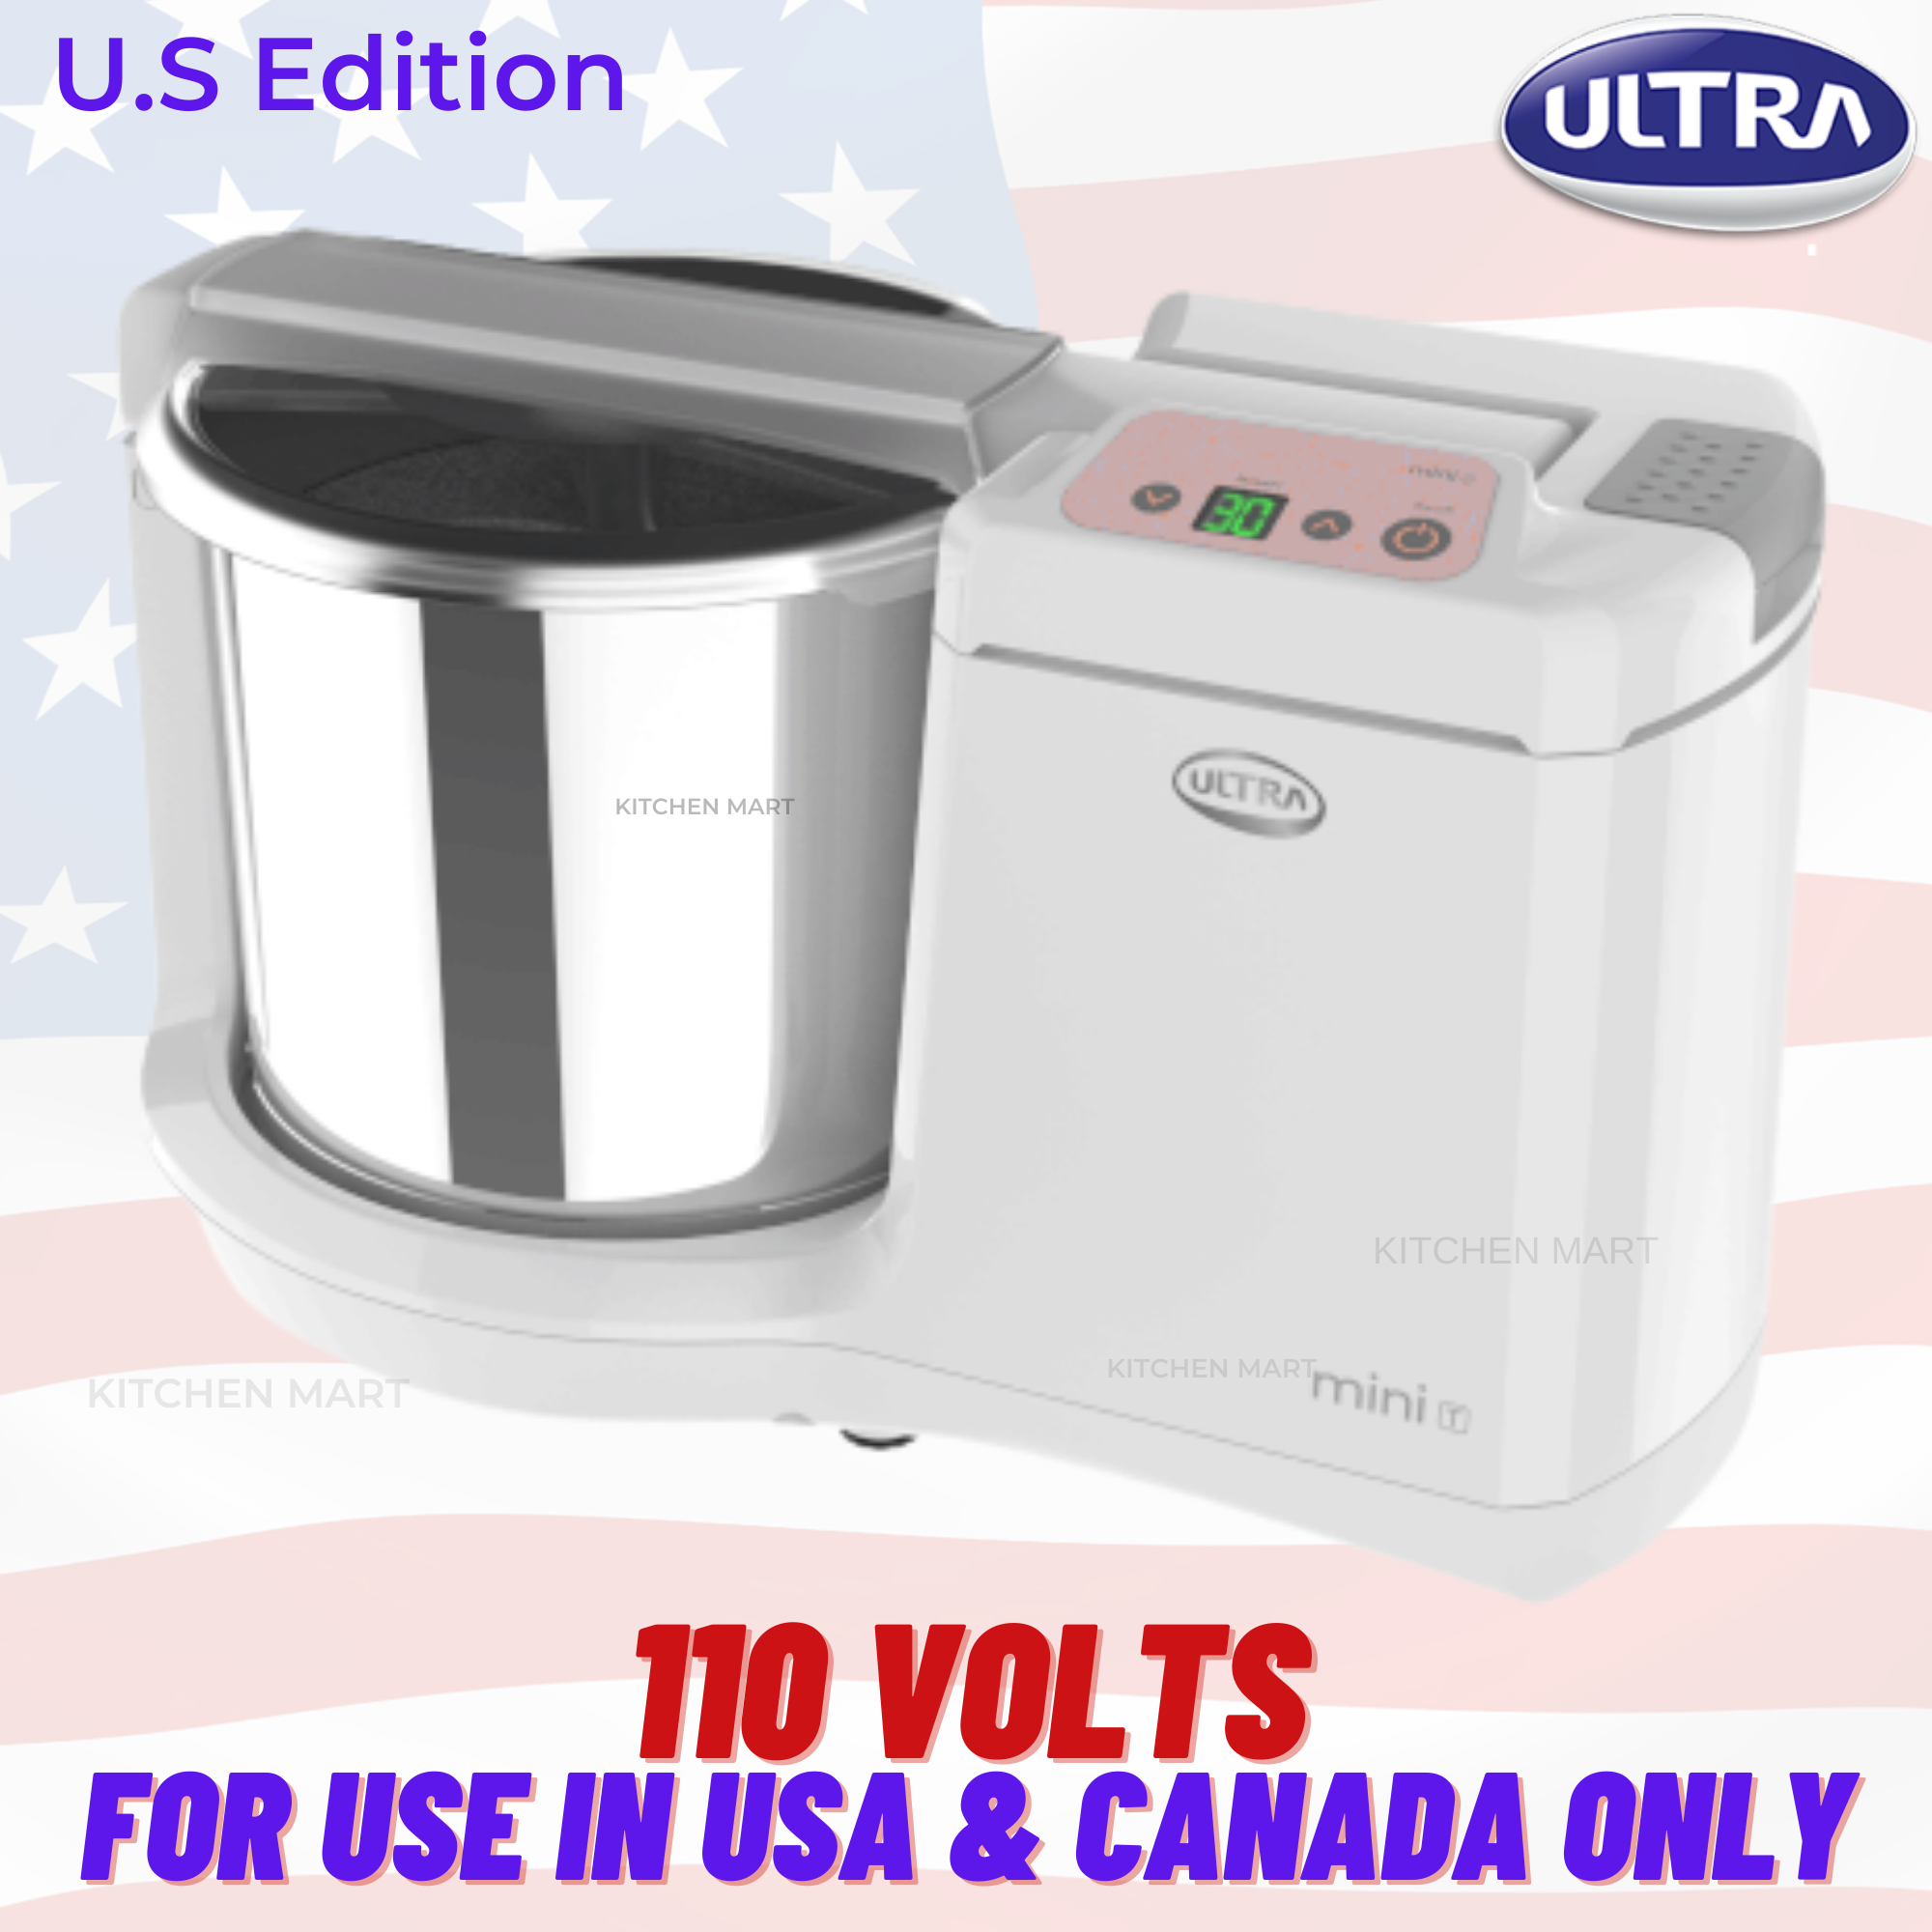 Elgi Ultra Wet Grinder Mini T with timer, 1.25 Litres, 110 Volts for use in USA & Canada only